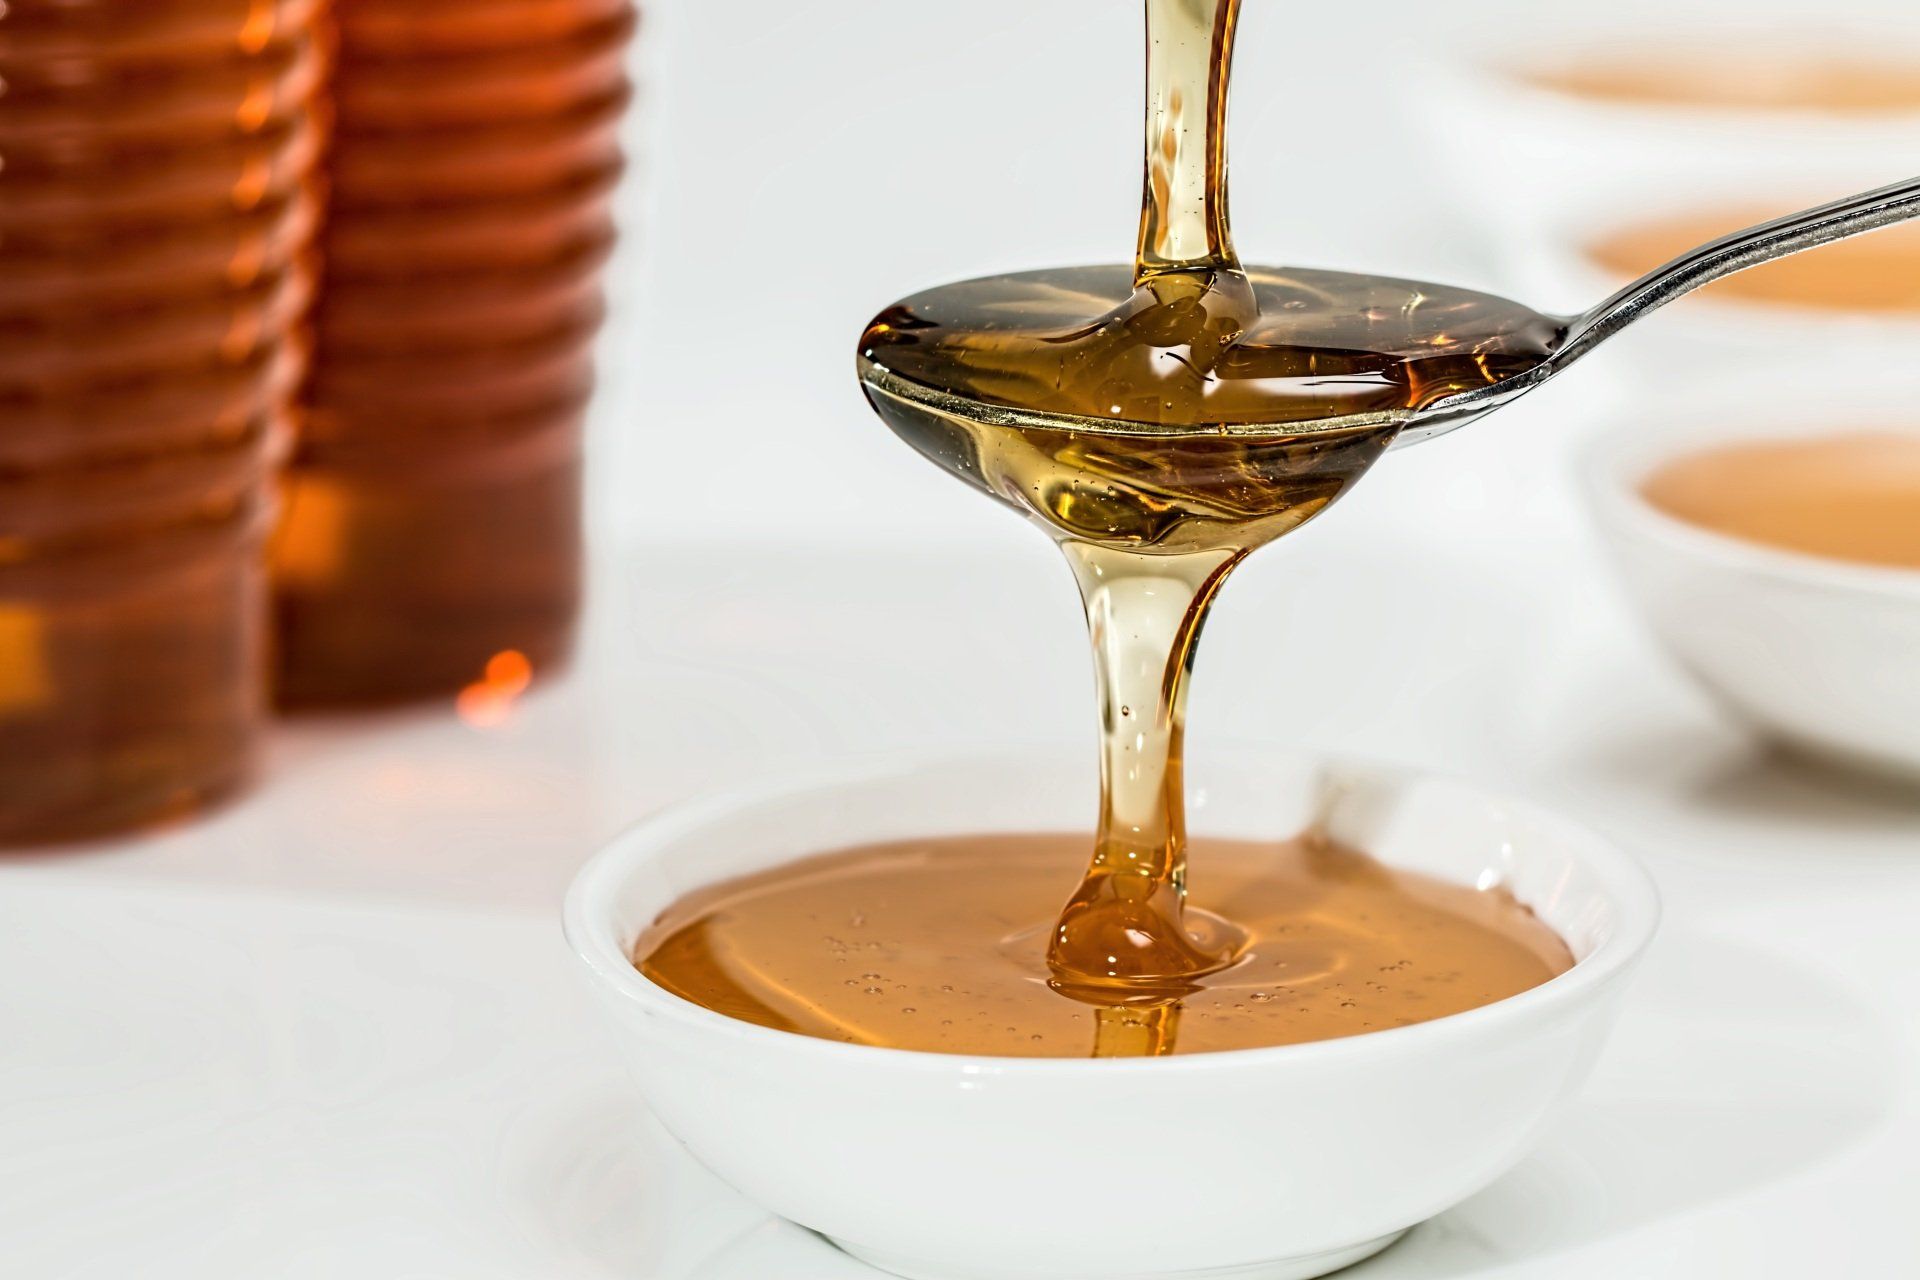 Honey being dripped onto a spoon and overflowing into a bowl